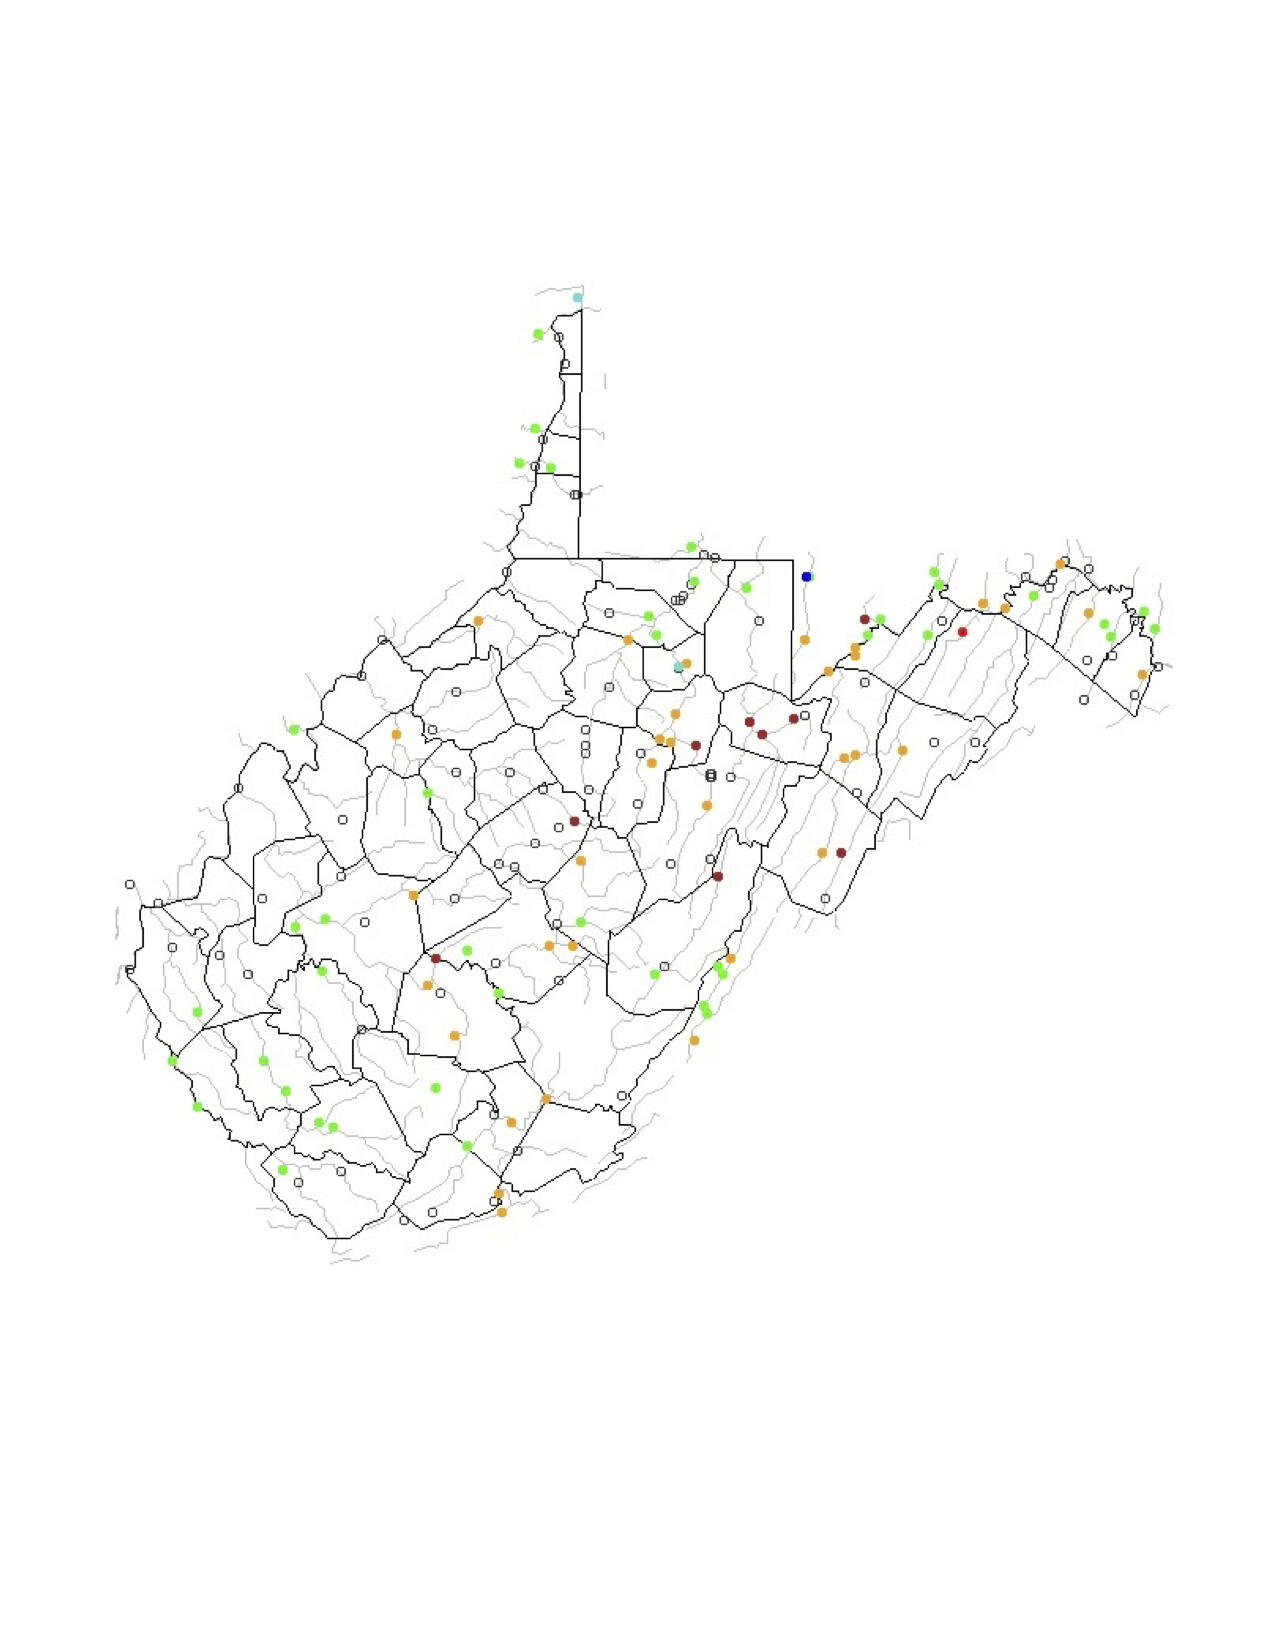 West Virginia State Map Showing Streamgage Locations